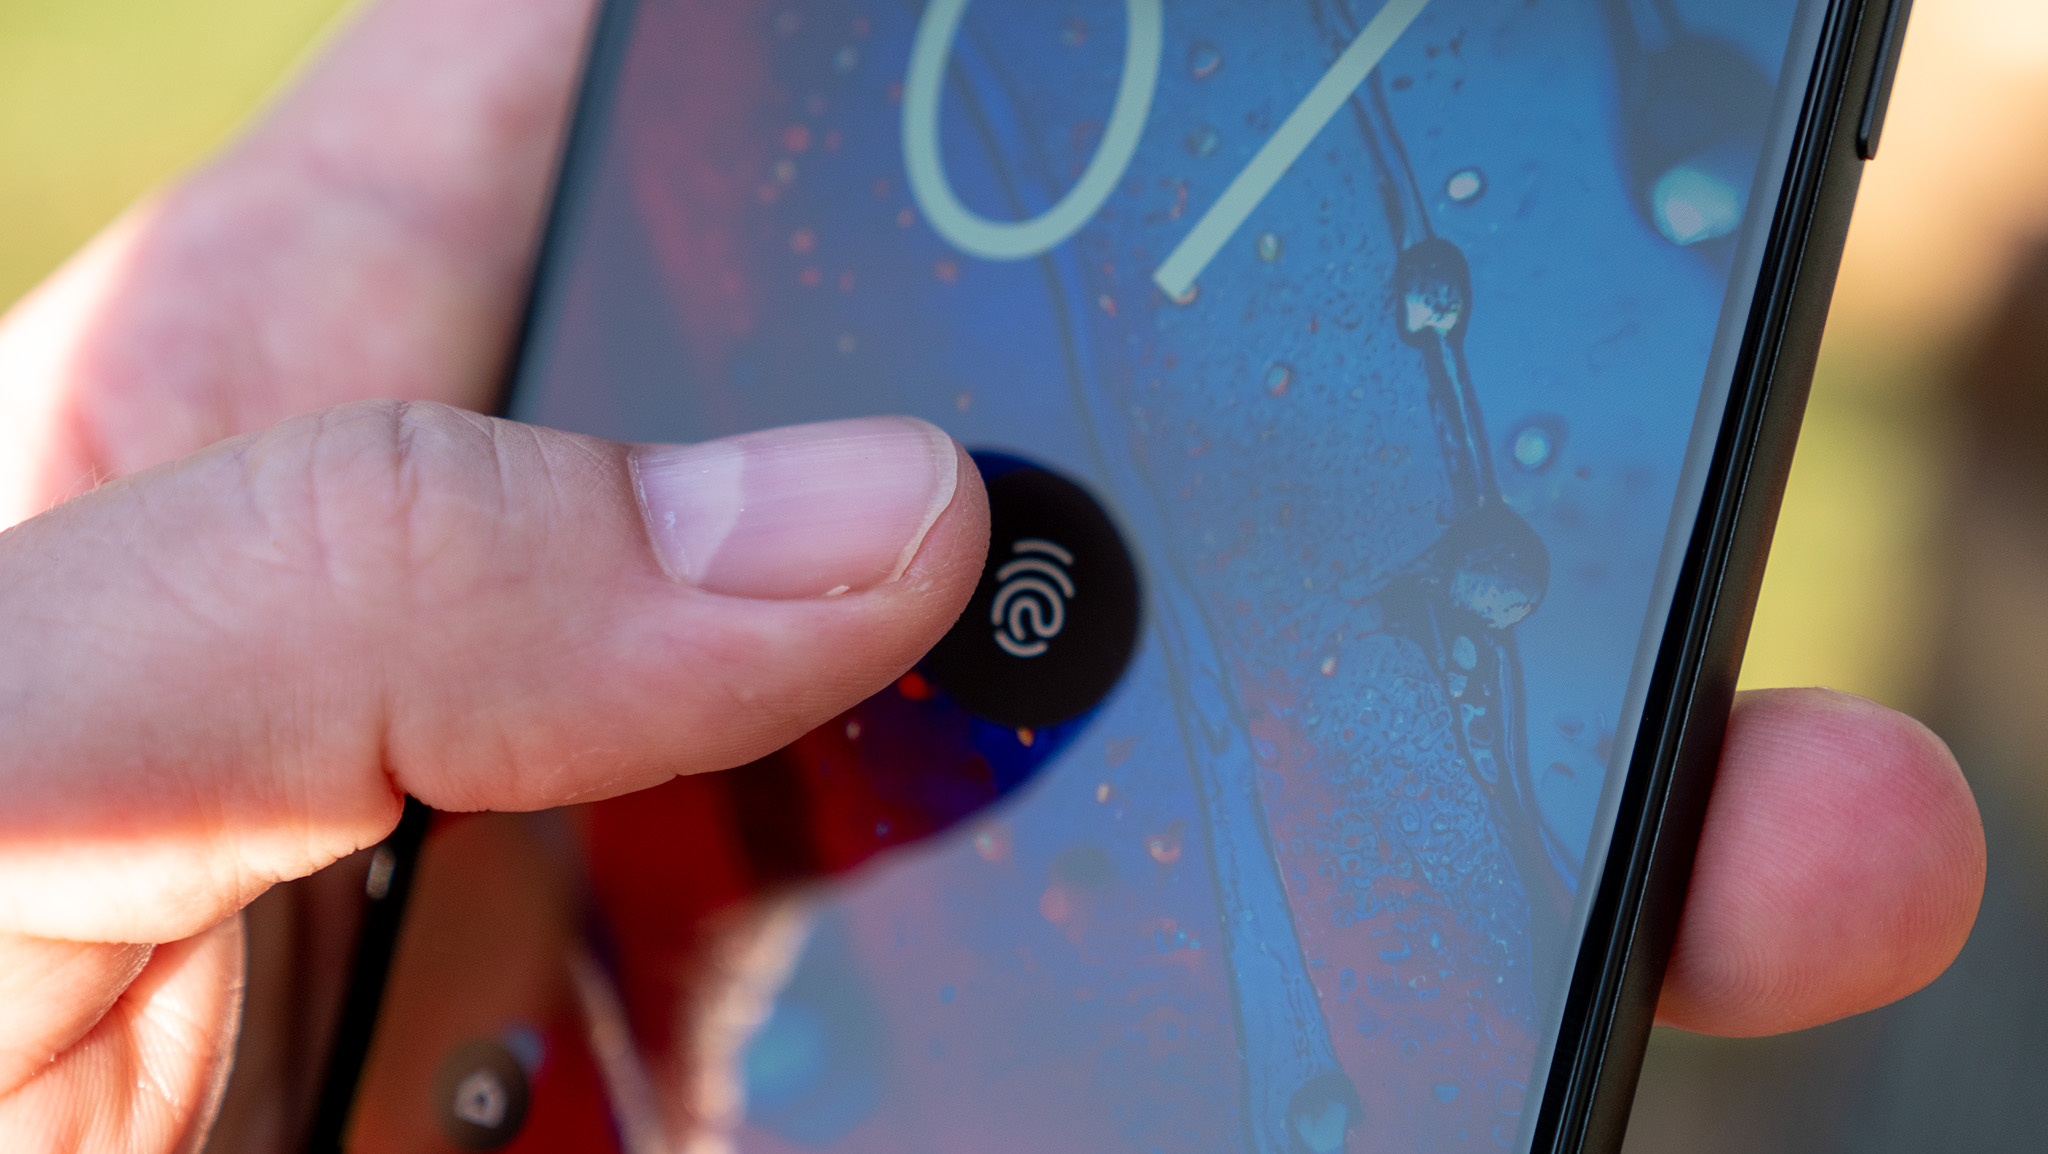 Tapping the in-display fingerprint sensor on the Google Pixel 6a